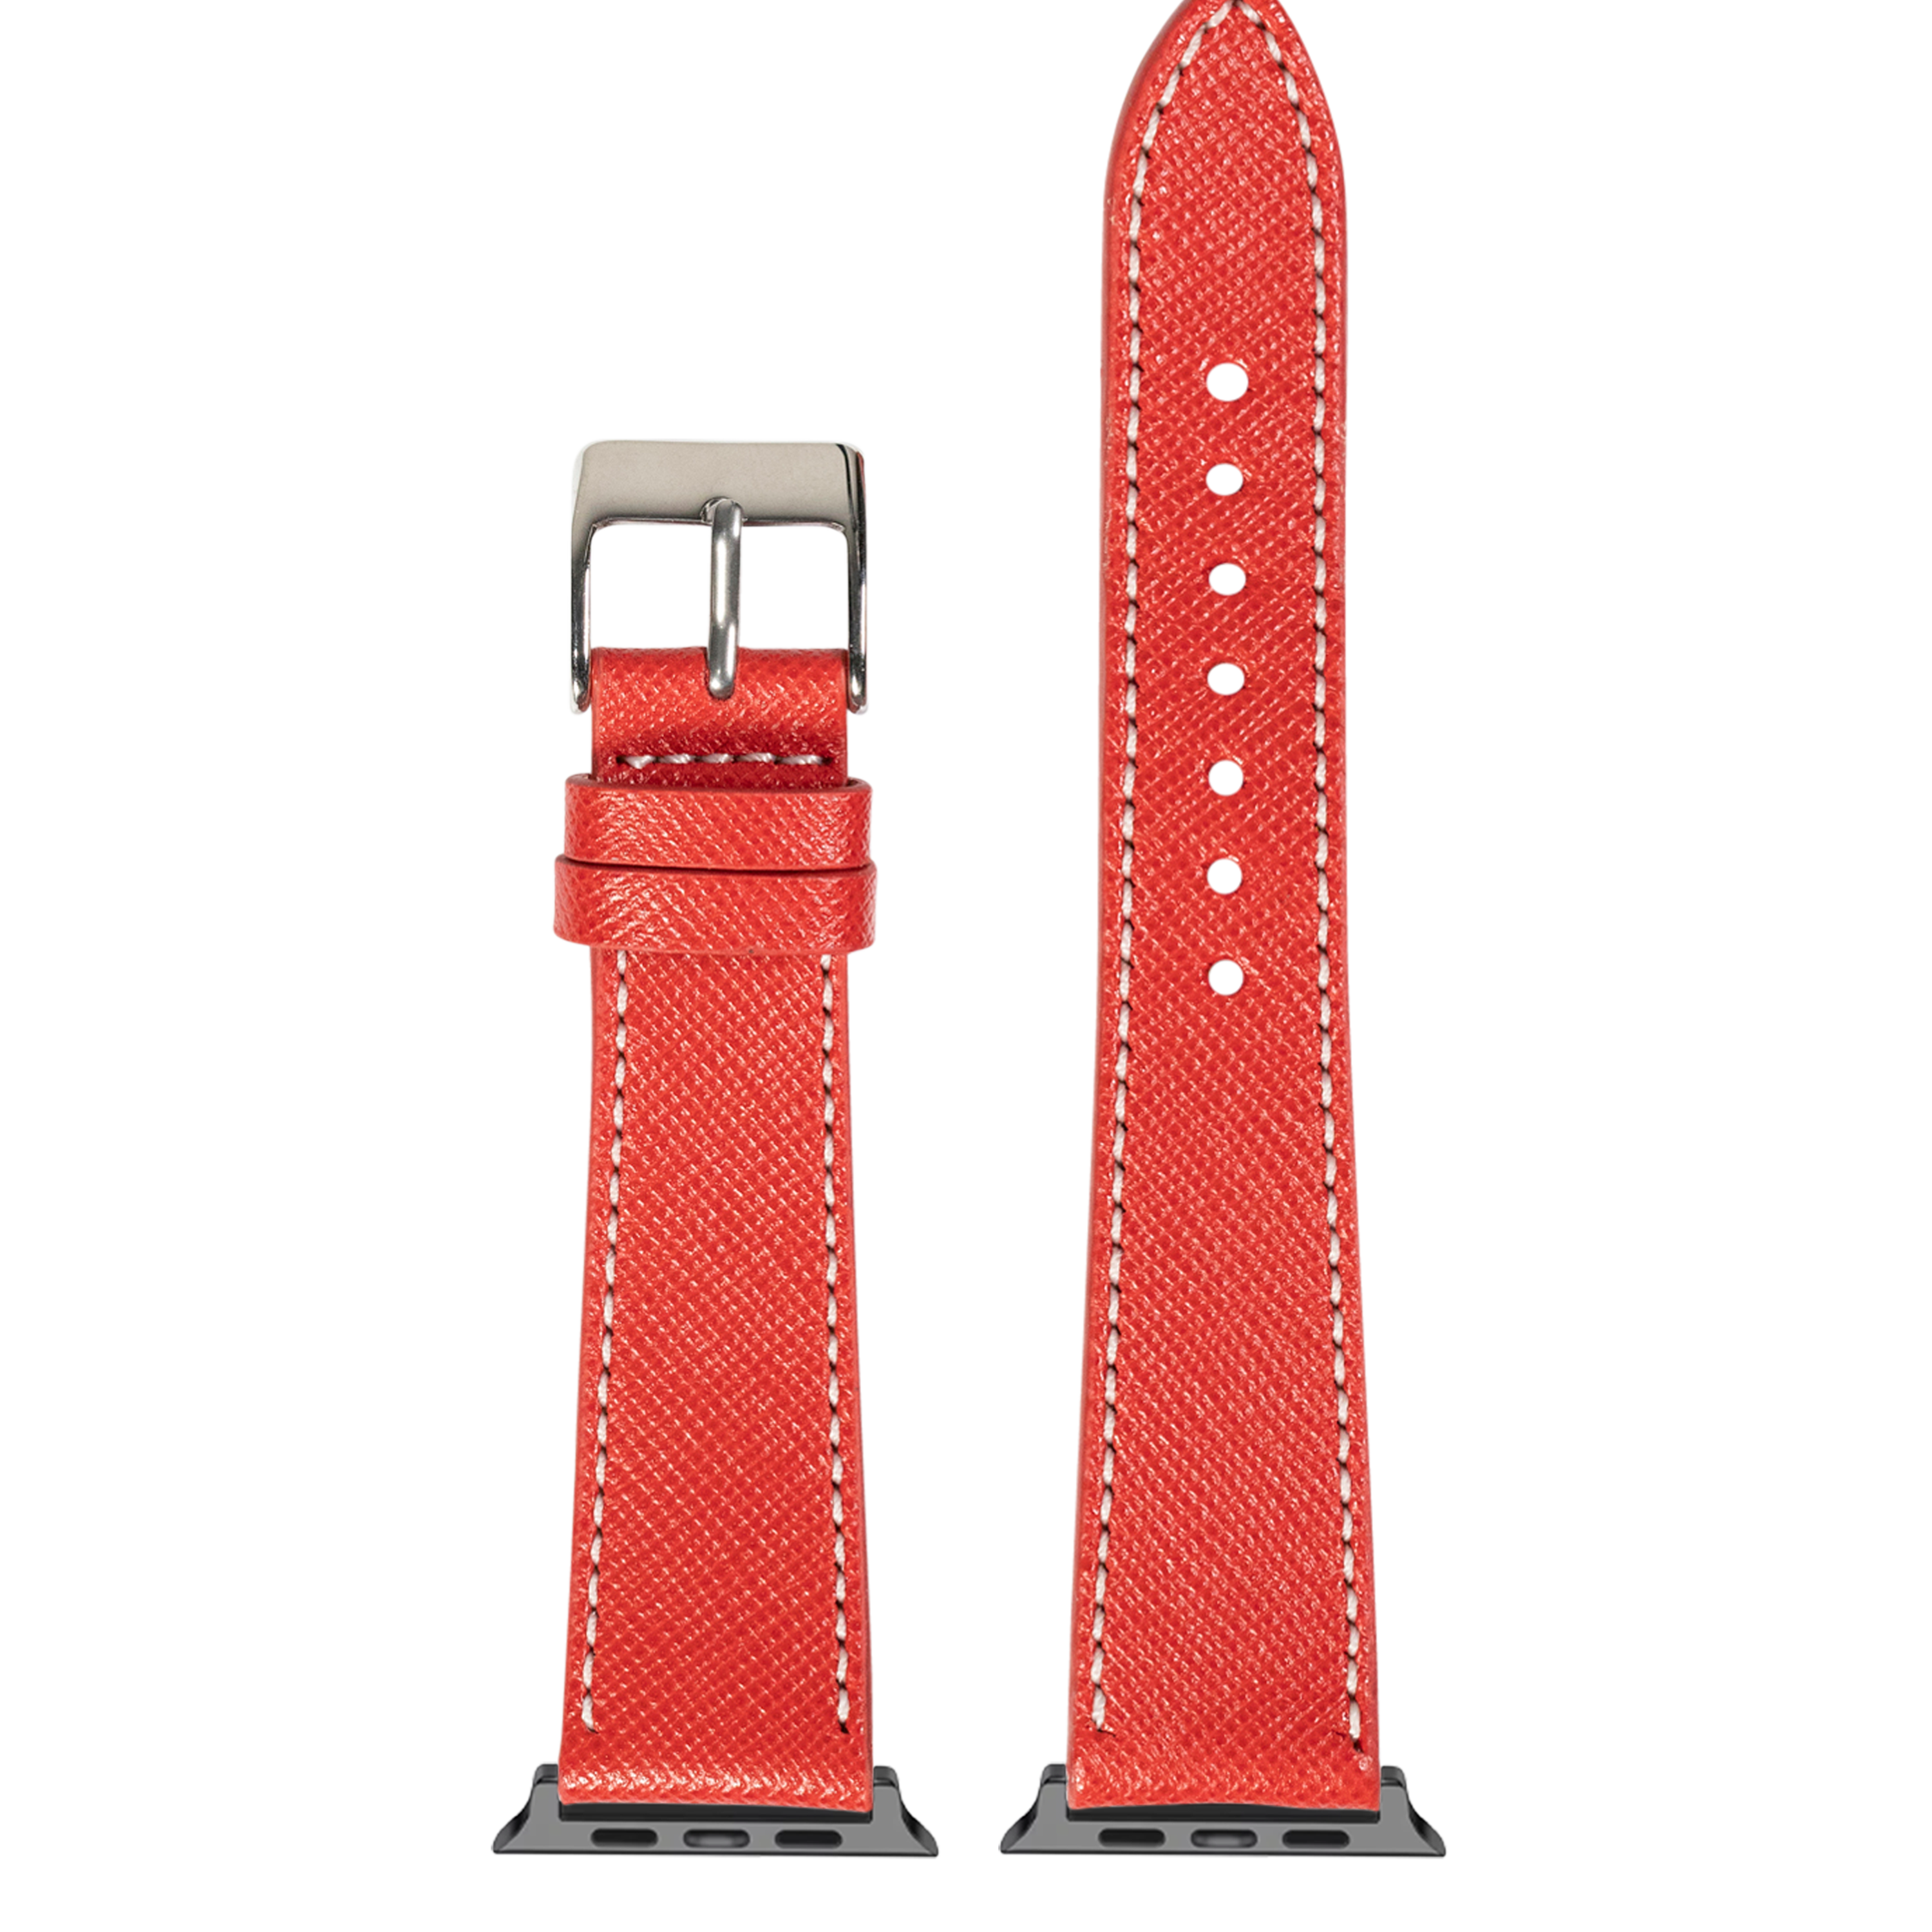 [Apple Watch] Saffiano Leather - Red with White Stitching